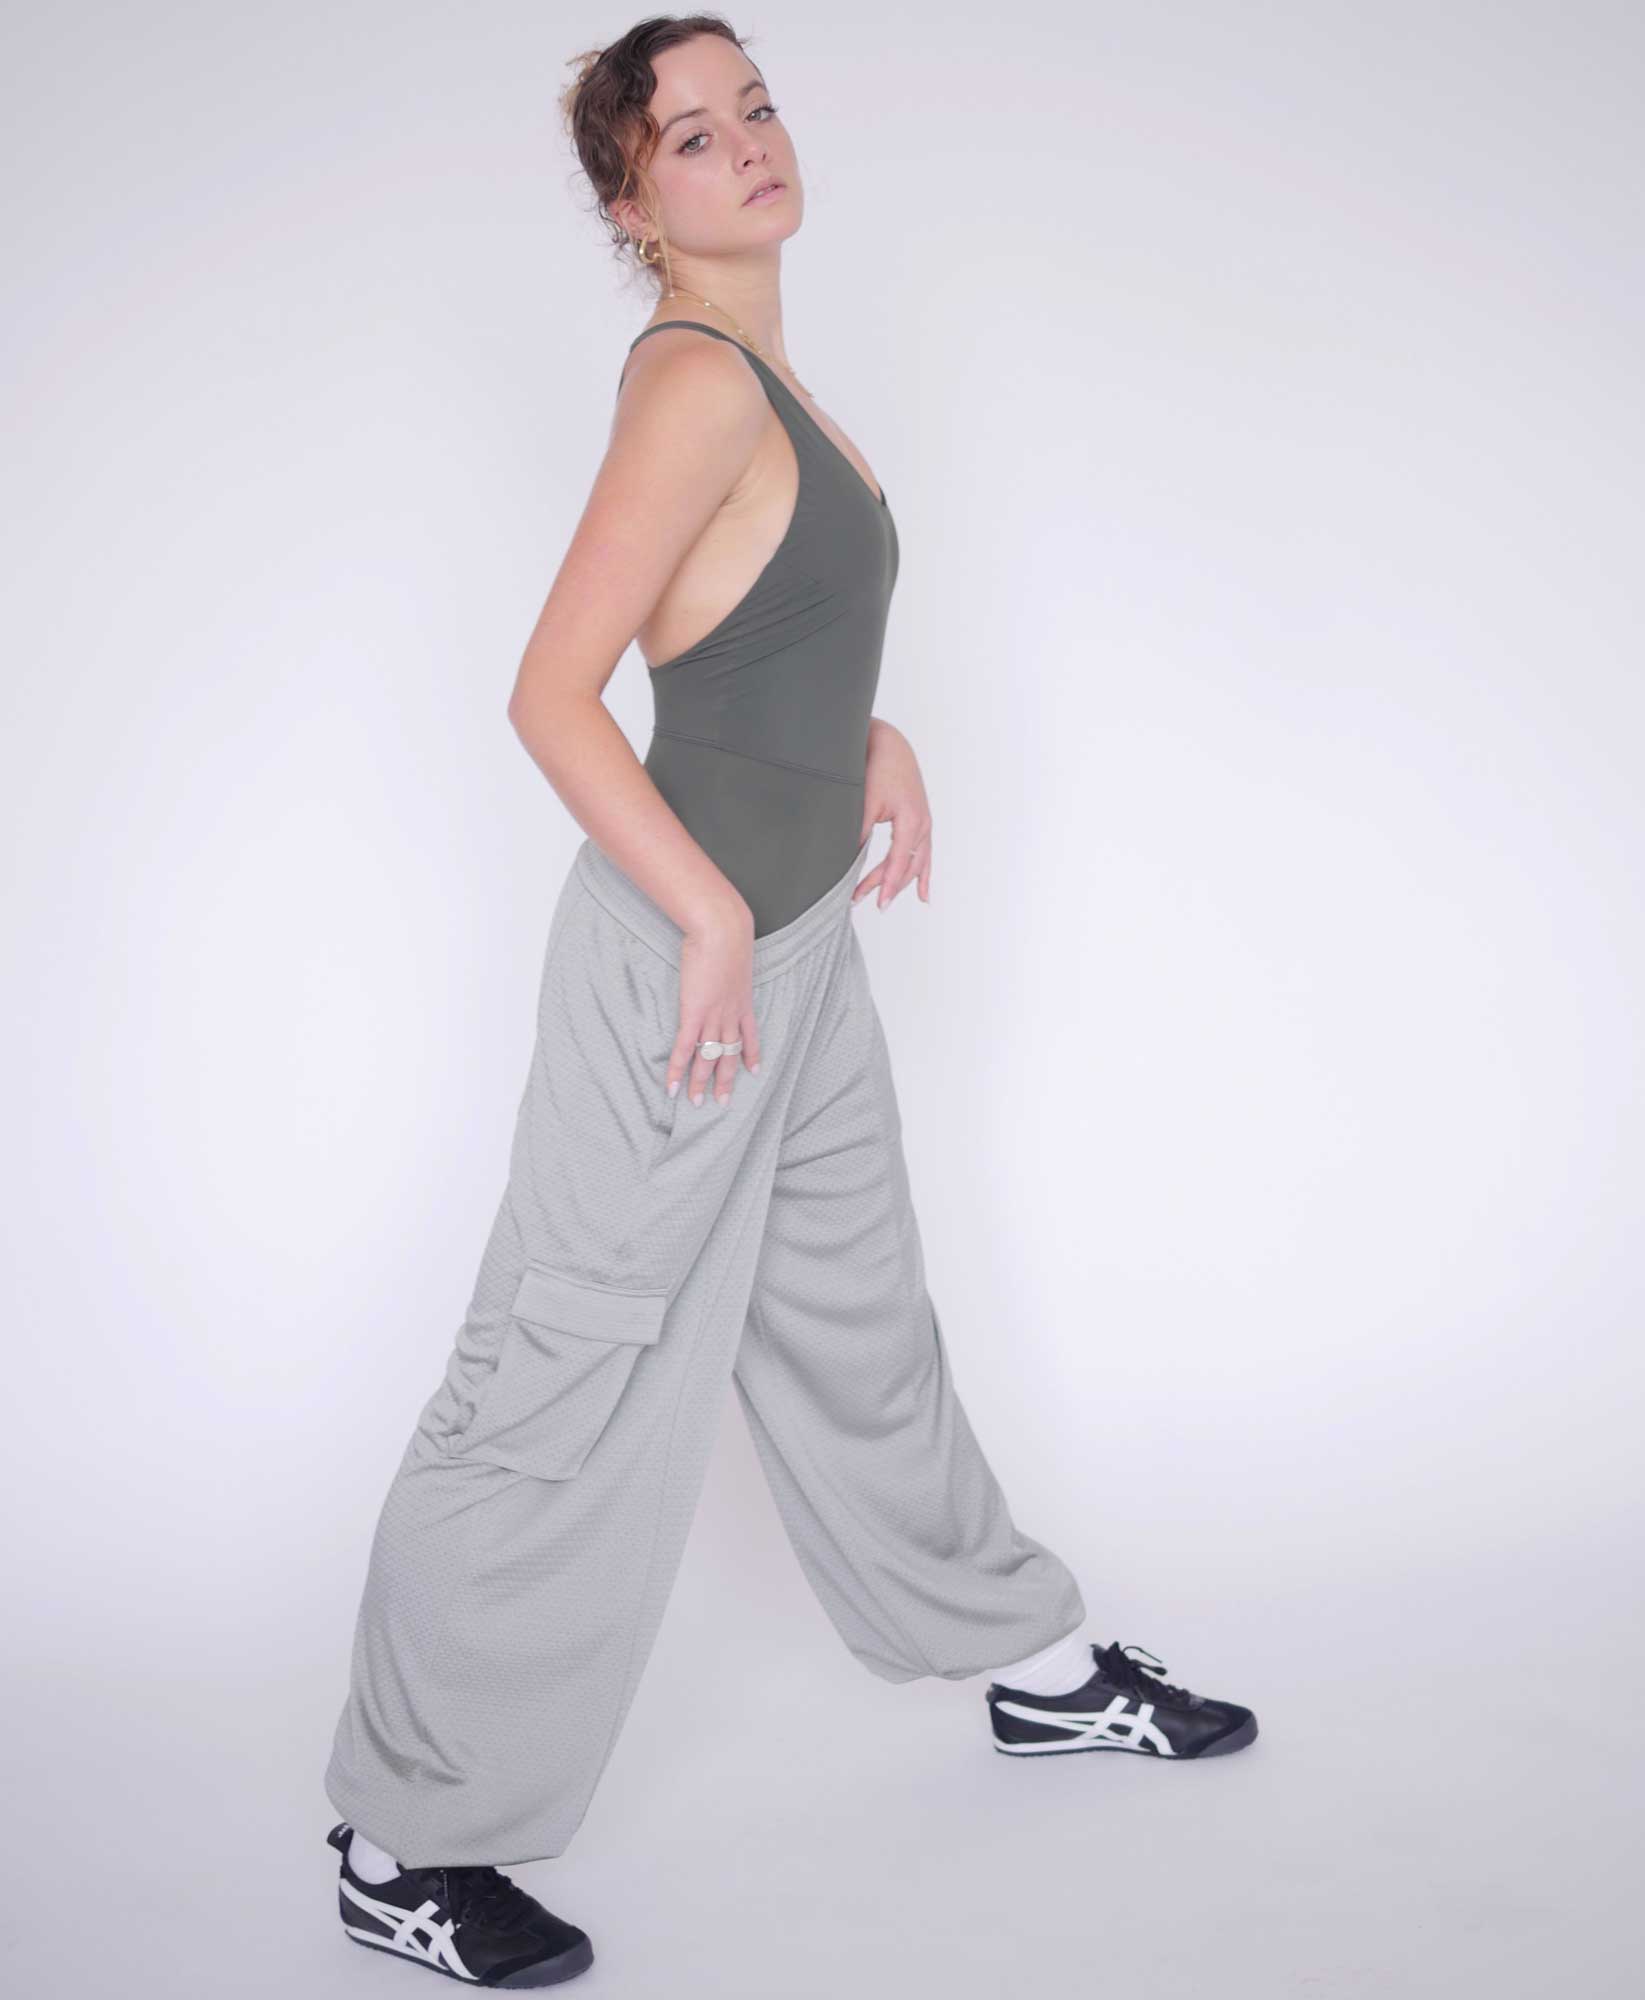 Wear One's At Arena Pant in Mineral Grey on Model Stretching Full Side View